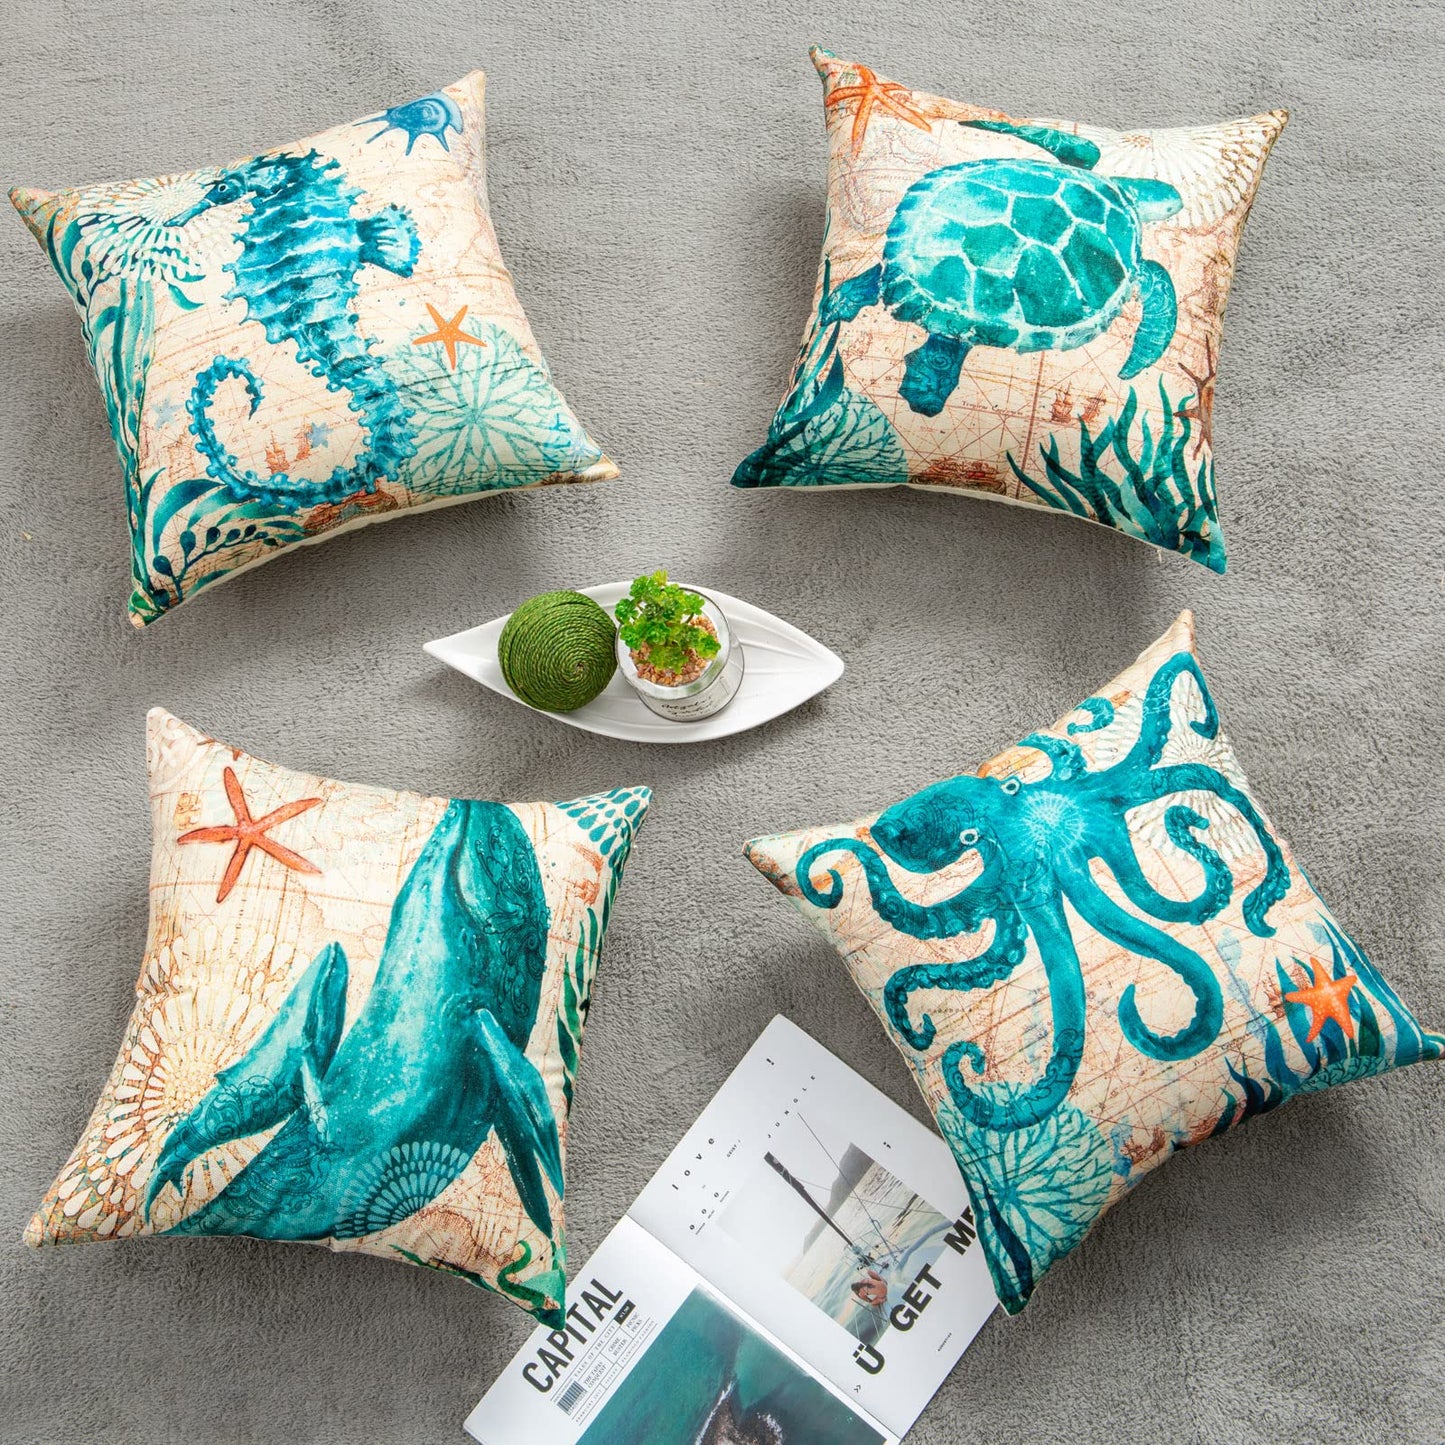 Cushion Covers Sea Turtle Printed Throw Pillow Cases For Home Decor